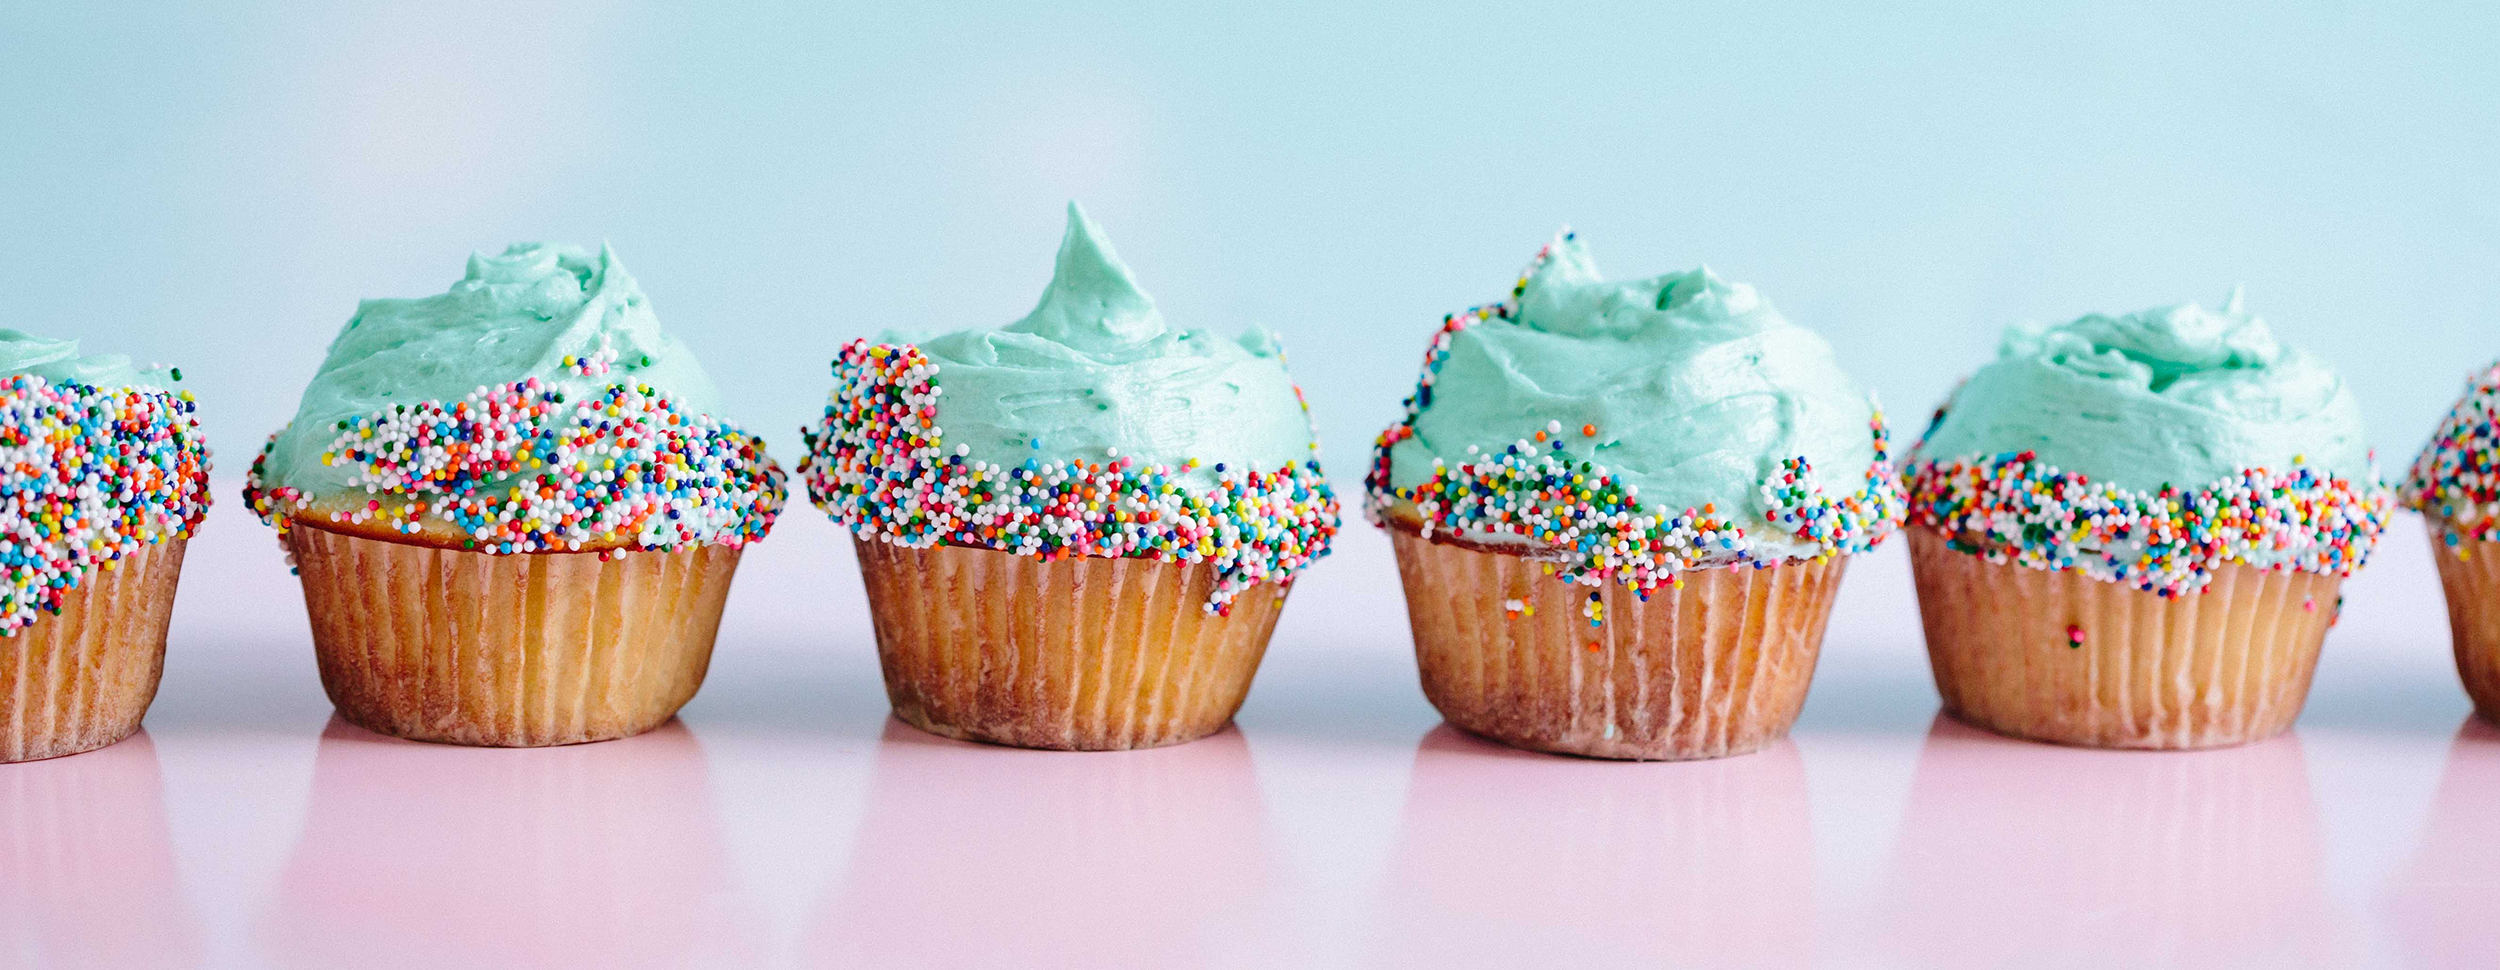 A line of cupcakes with aquamarine frosting and sprinkles against a pink and blue background